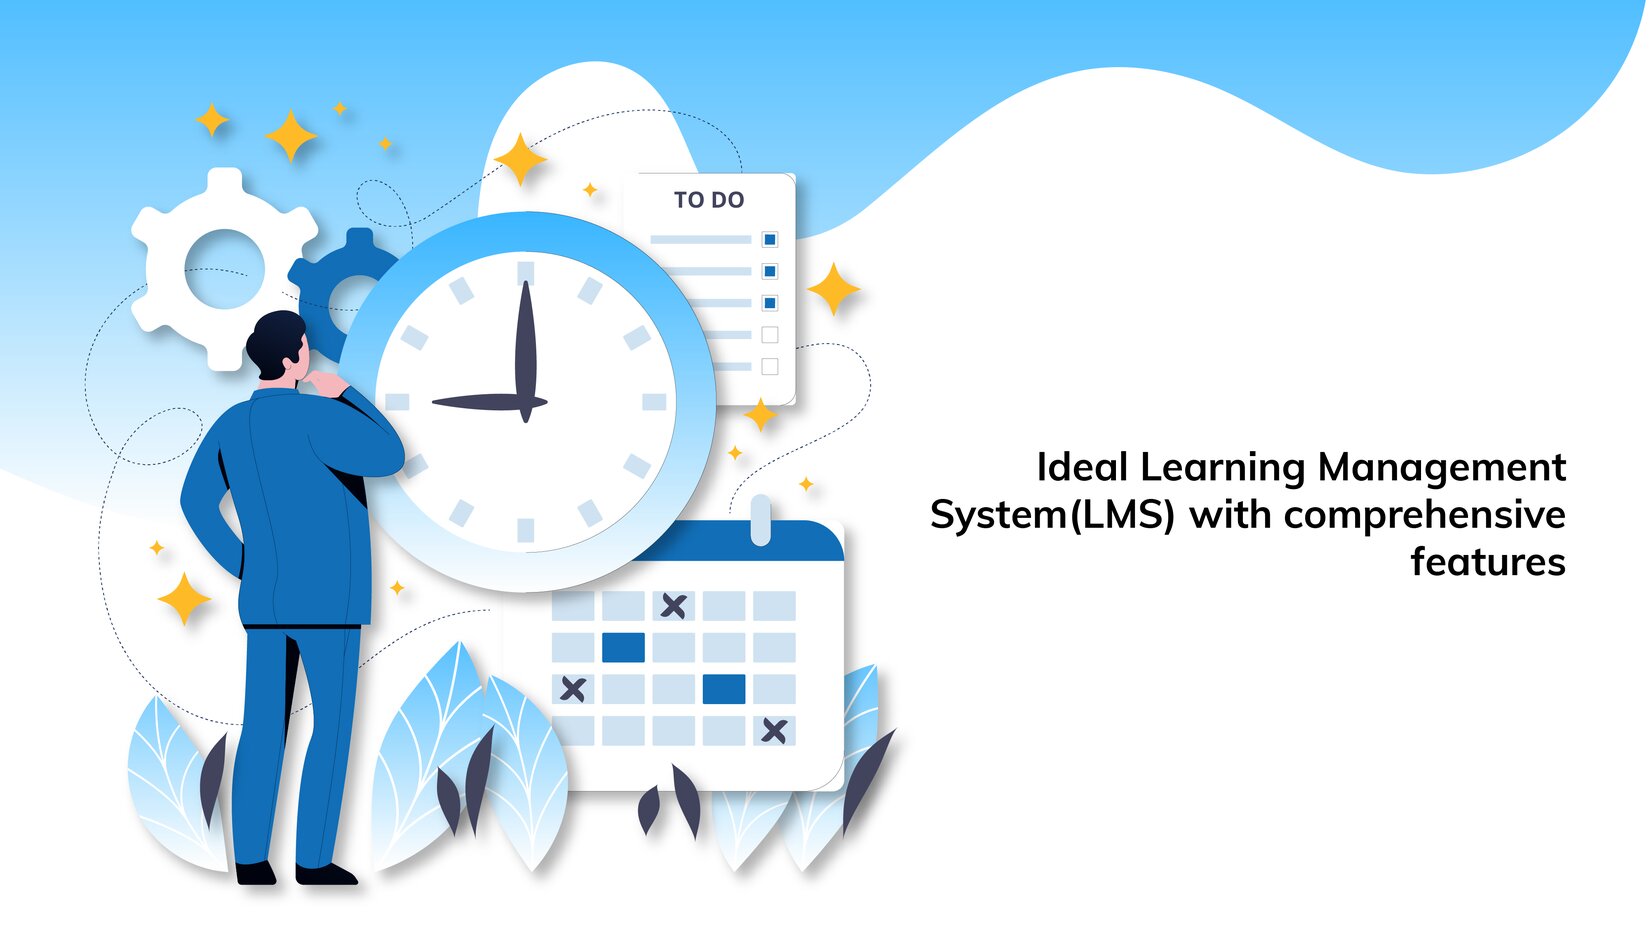 Ideal Learning Management System(LMS) with comprehensive features